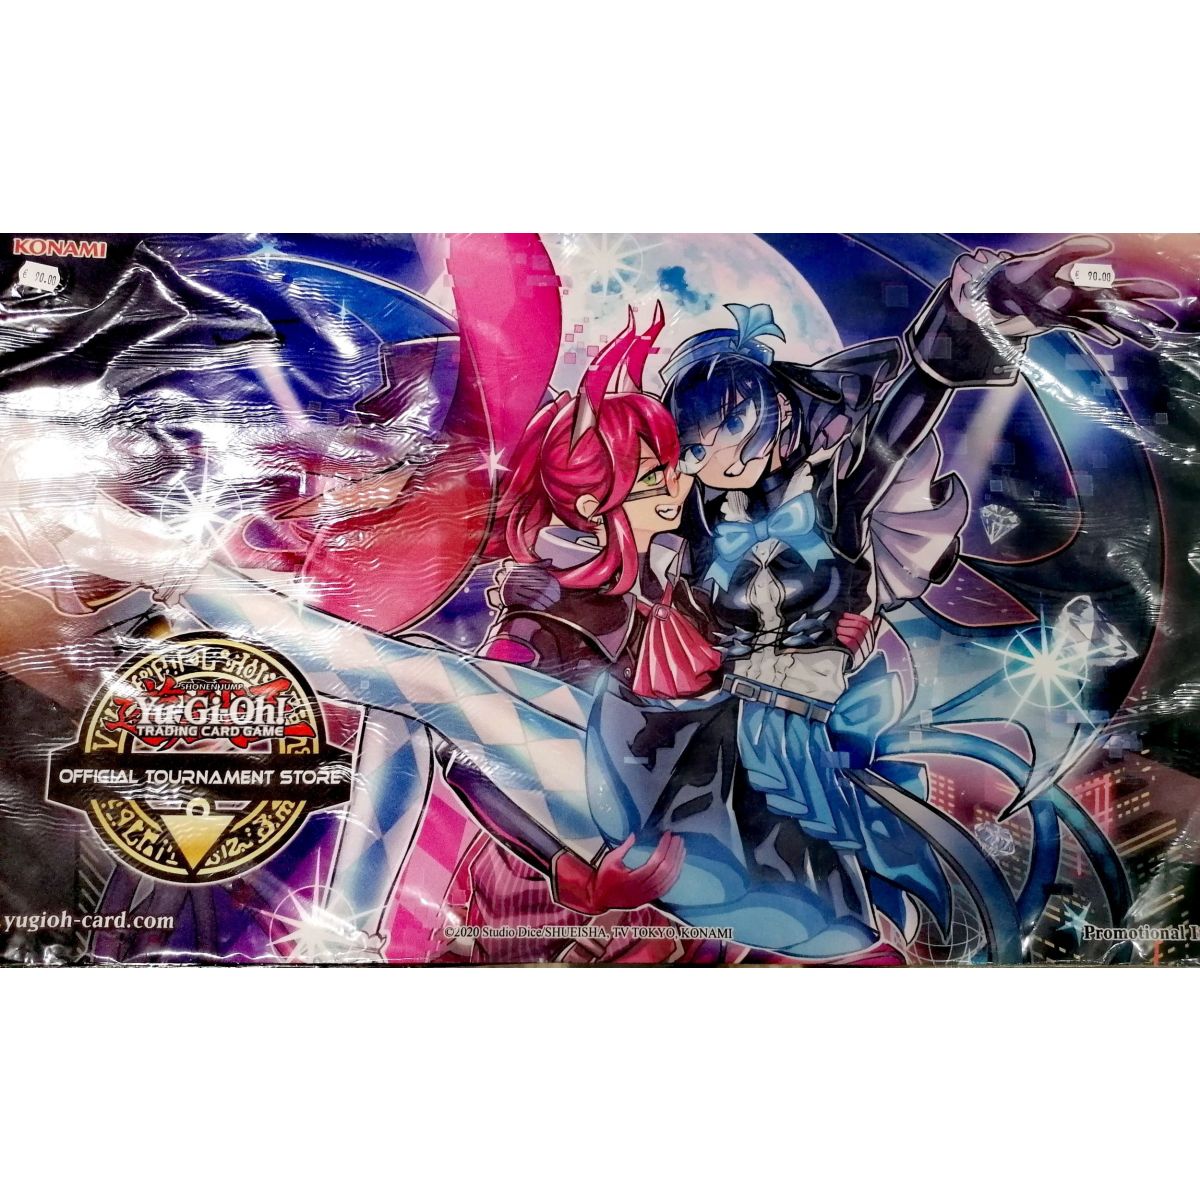 Item Yu Gi Oh! - Playmat - Back to Duel Evil Twin 2022 - Sealed